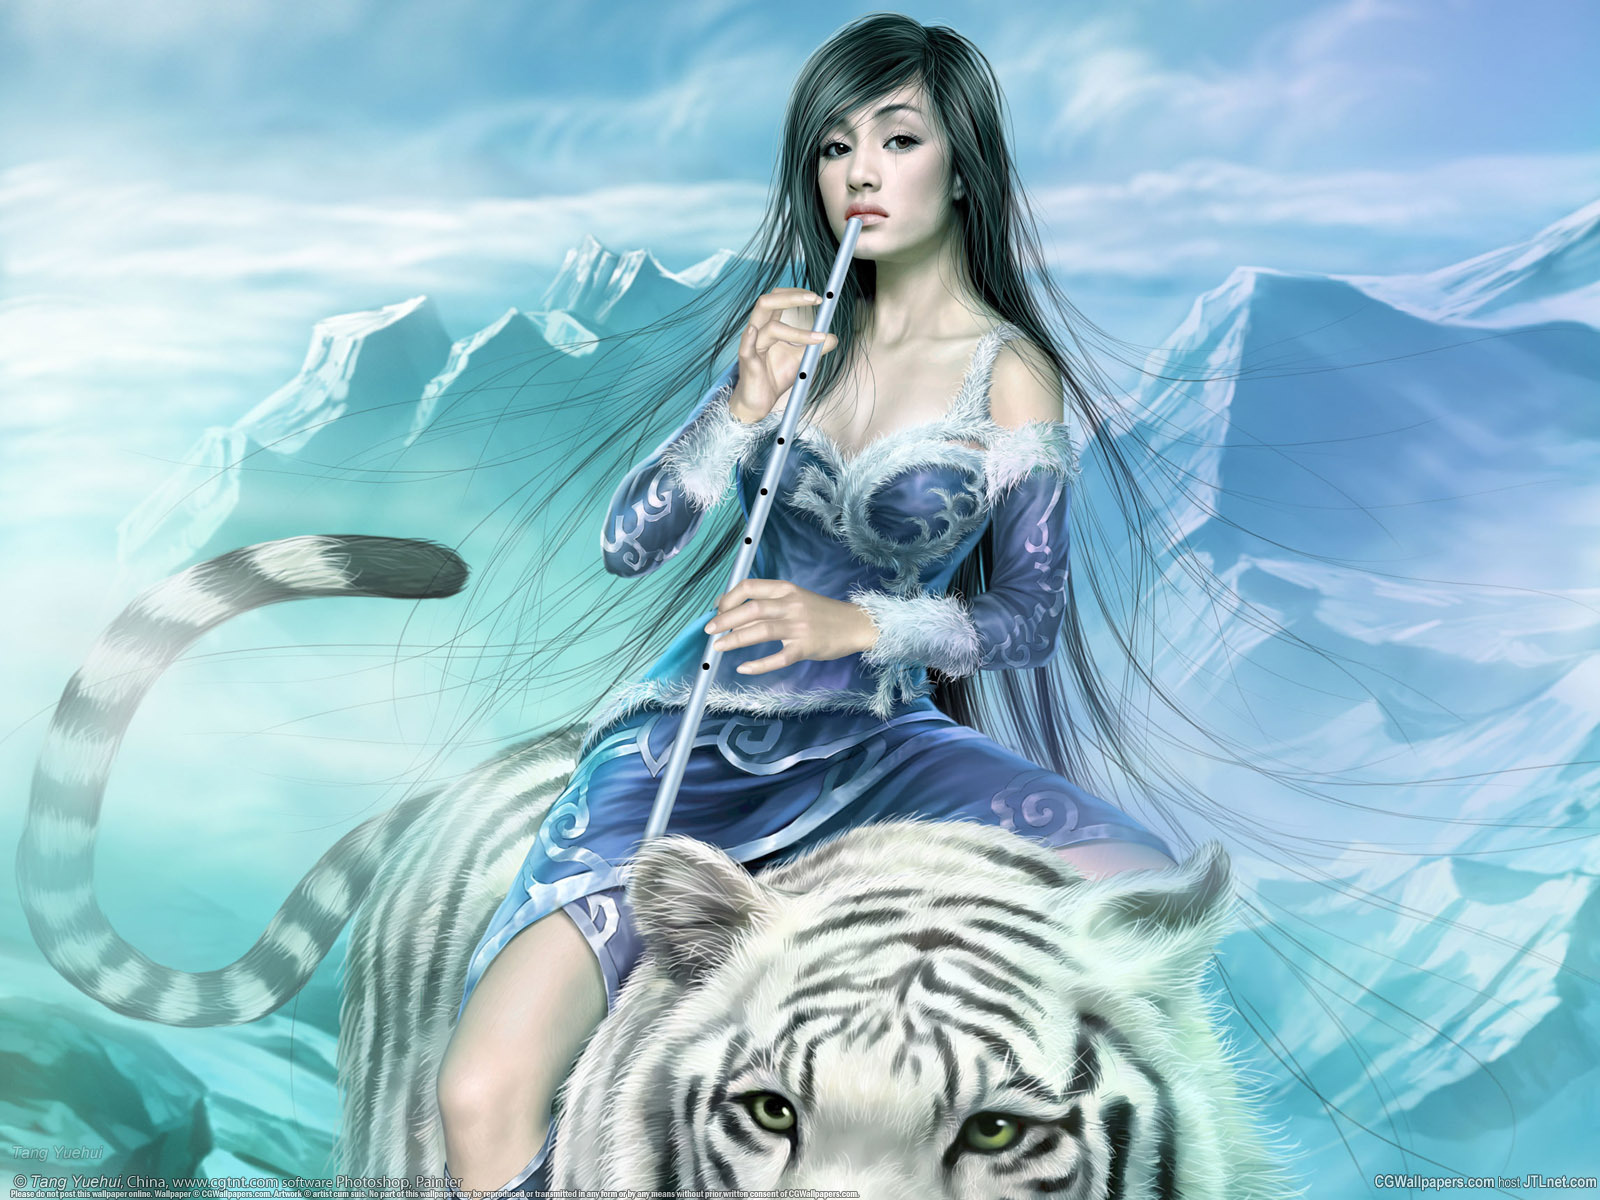 Wallpaper Pictures Image And Photos Fantasy Art